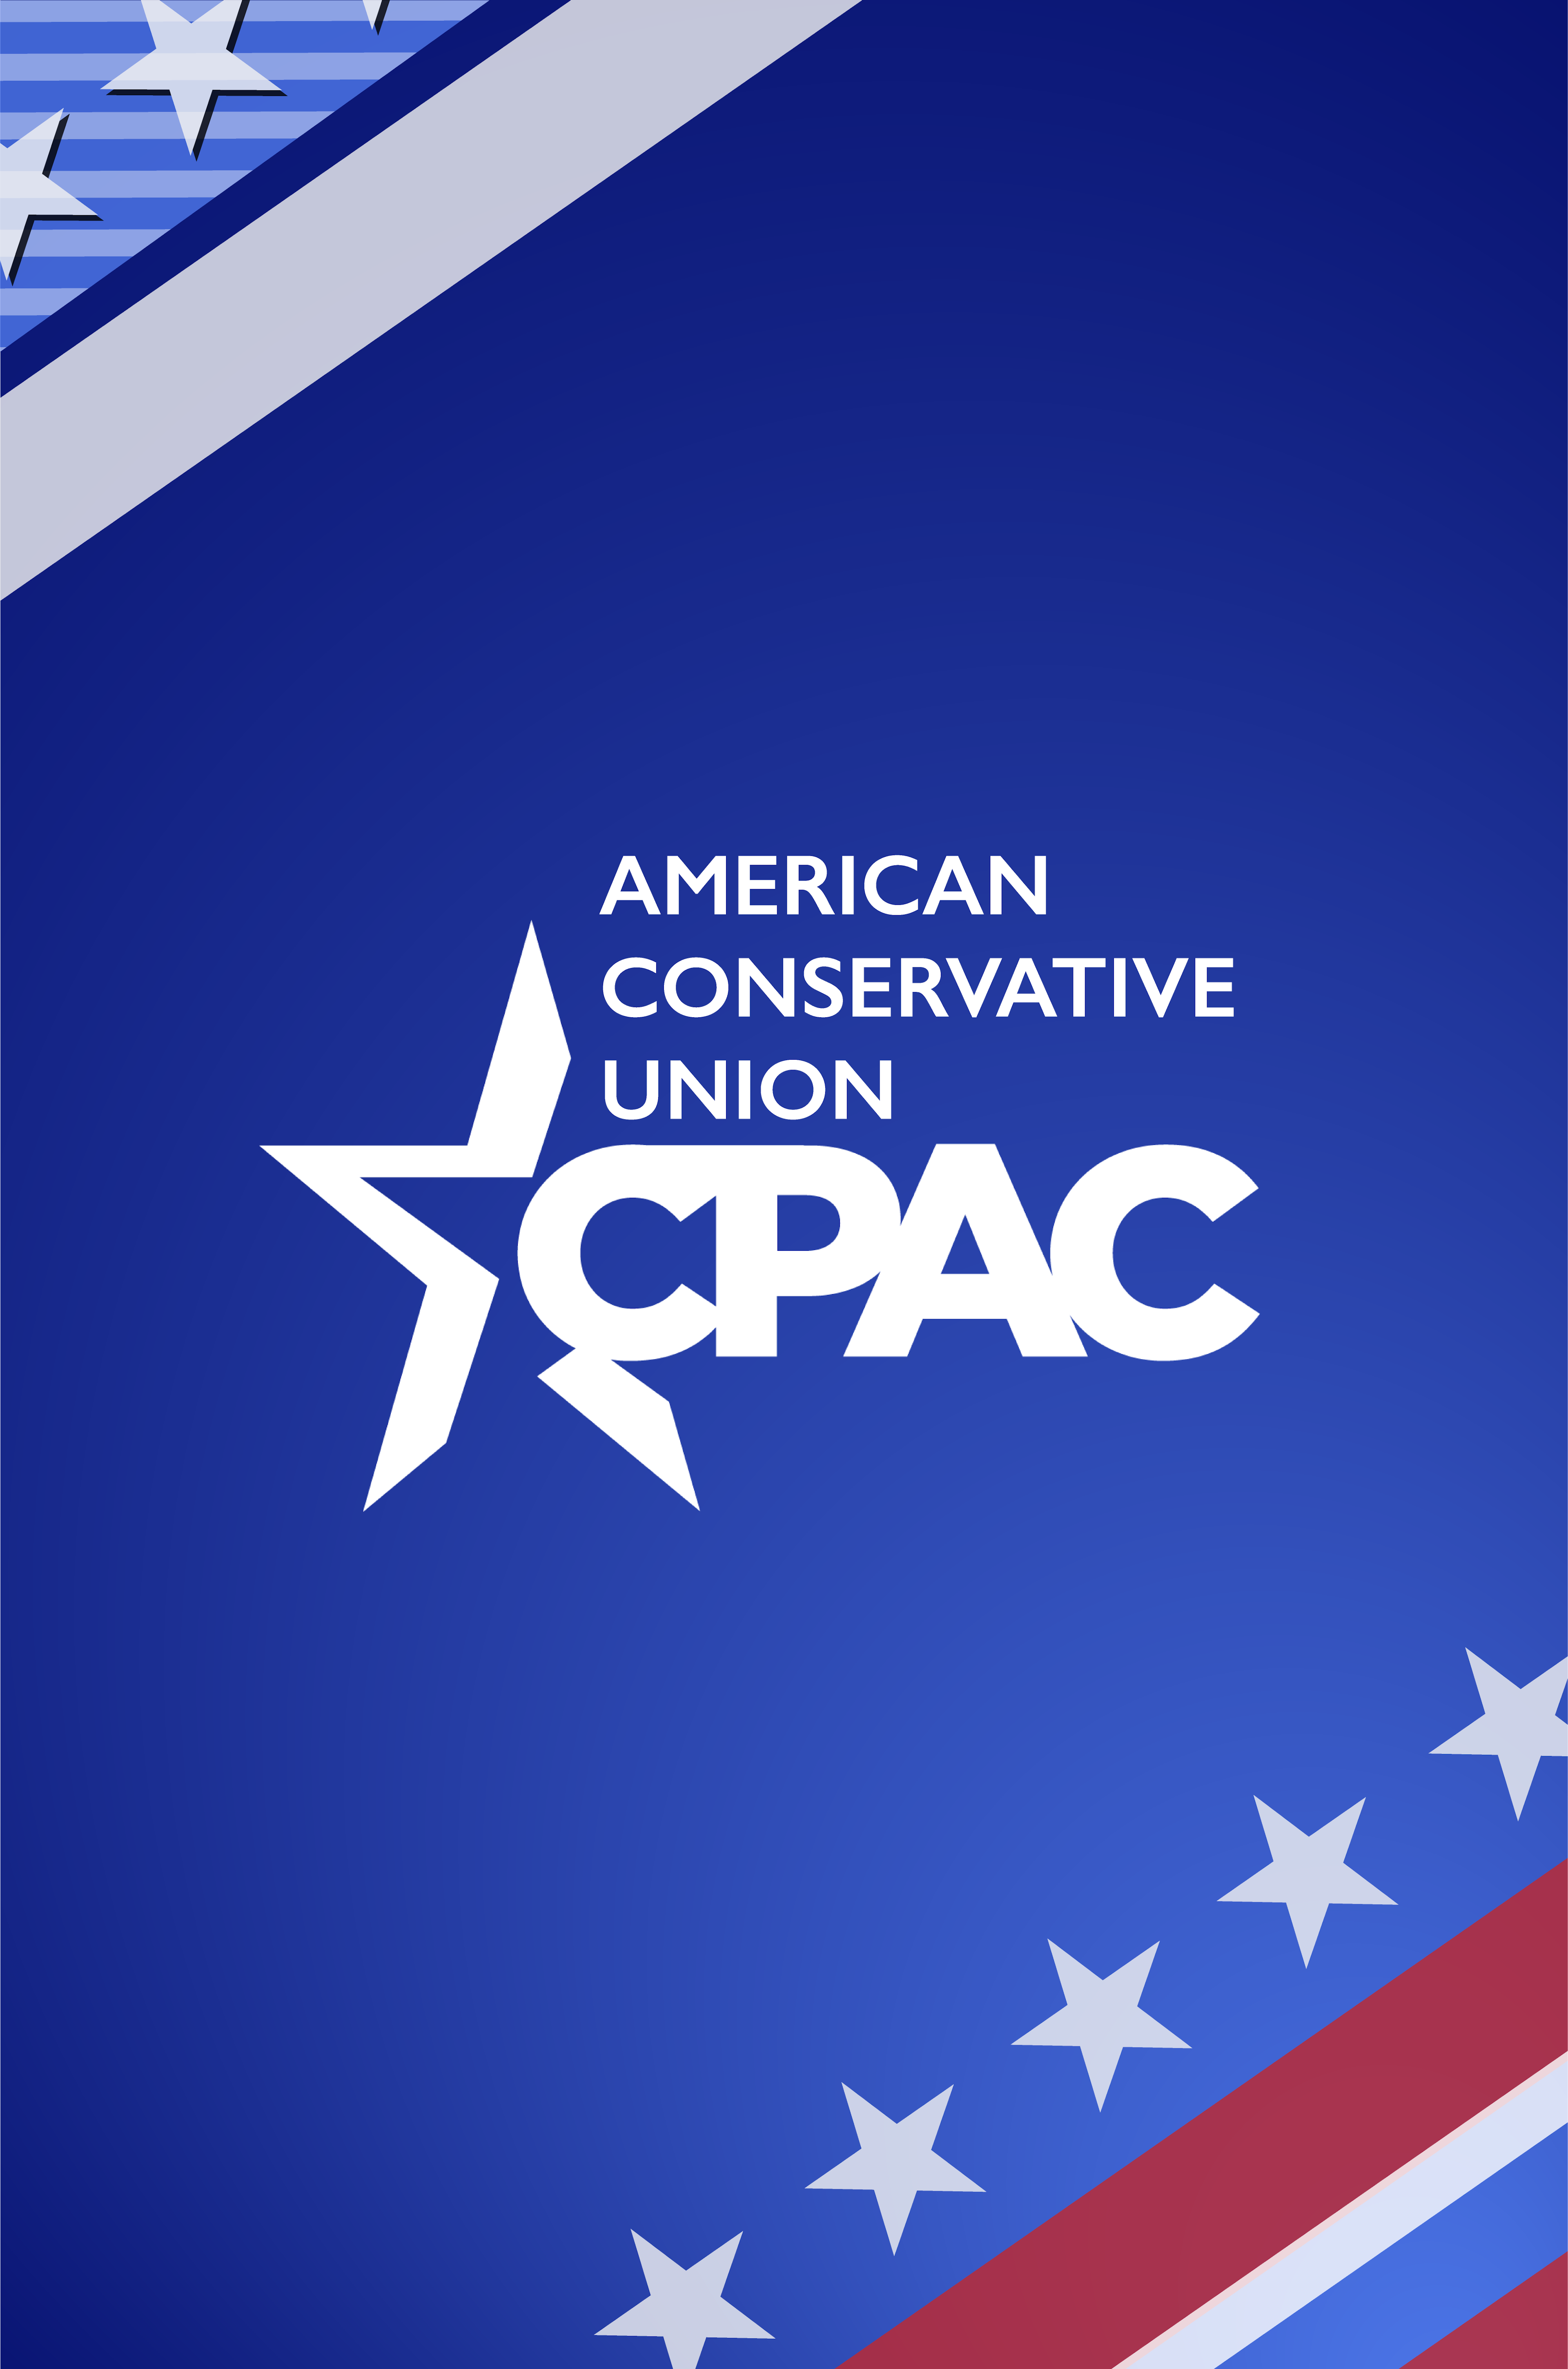 CPAC_US_VERTICAL.png